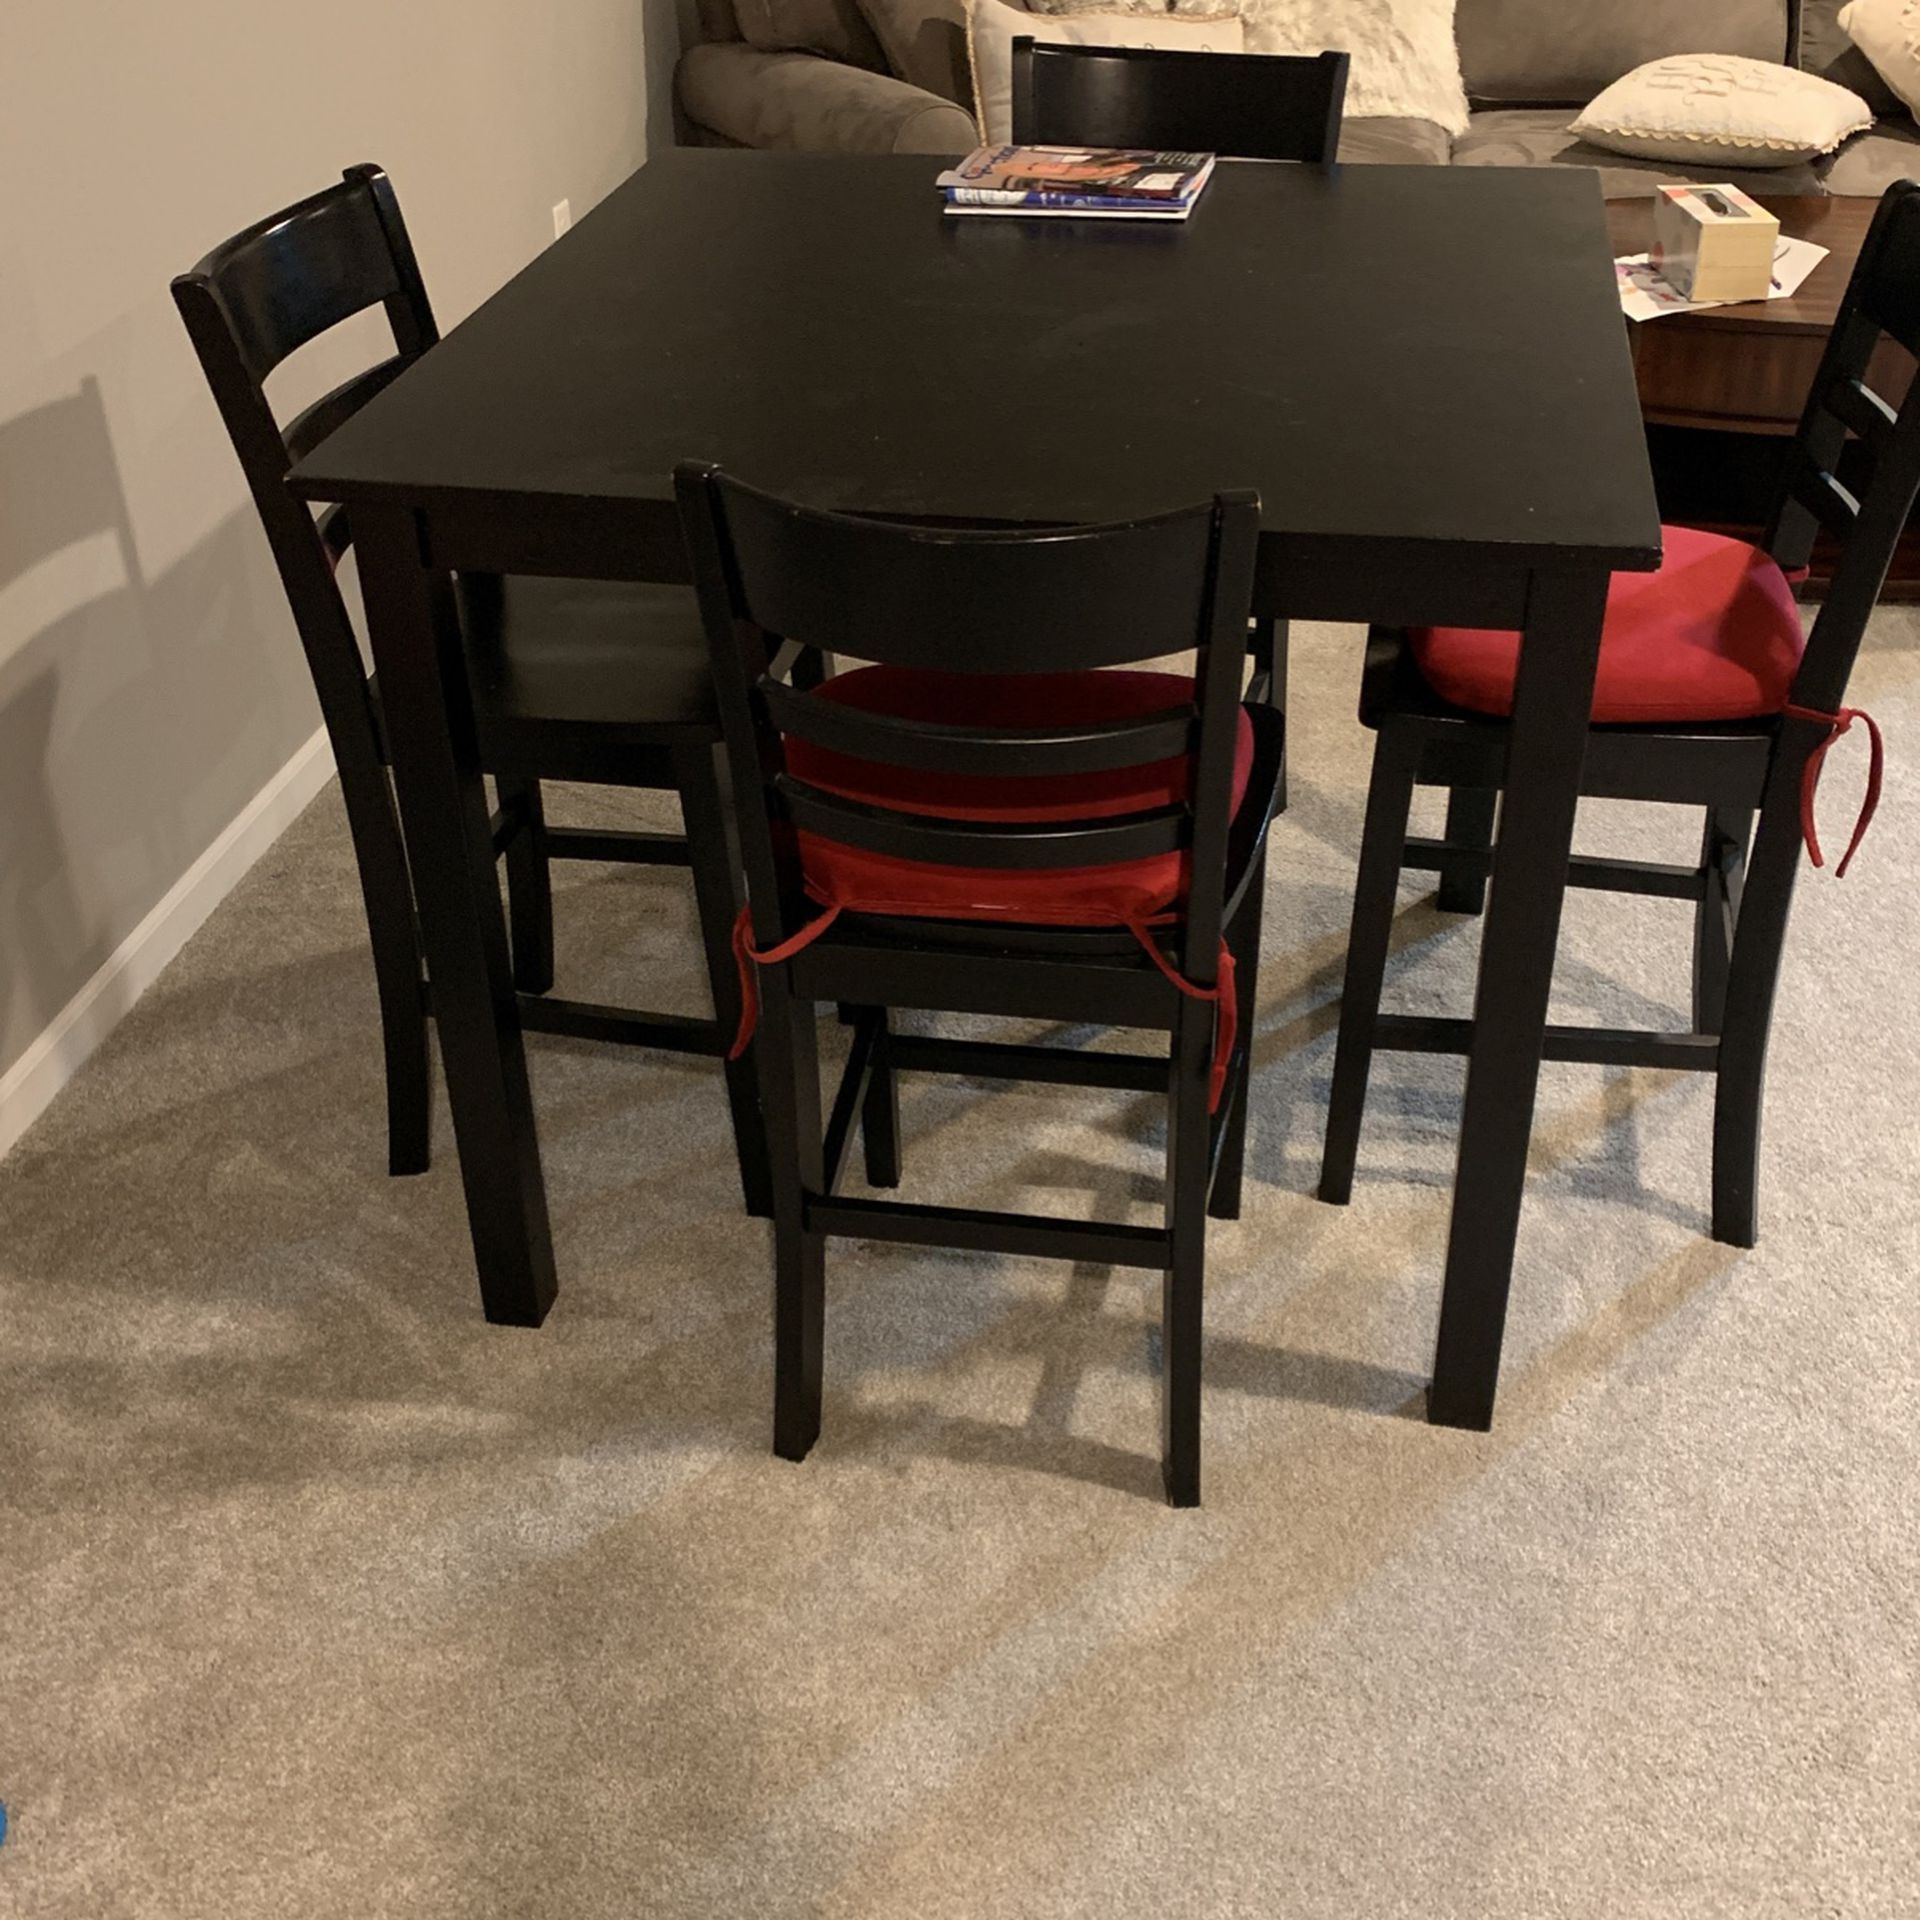 High Black Table With 4 Chairs